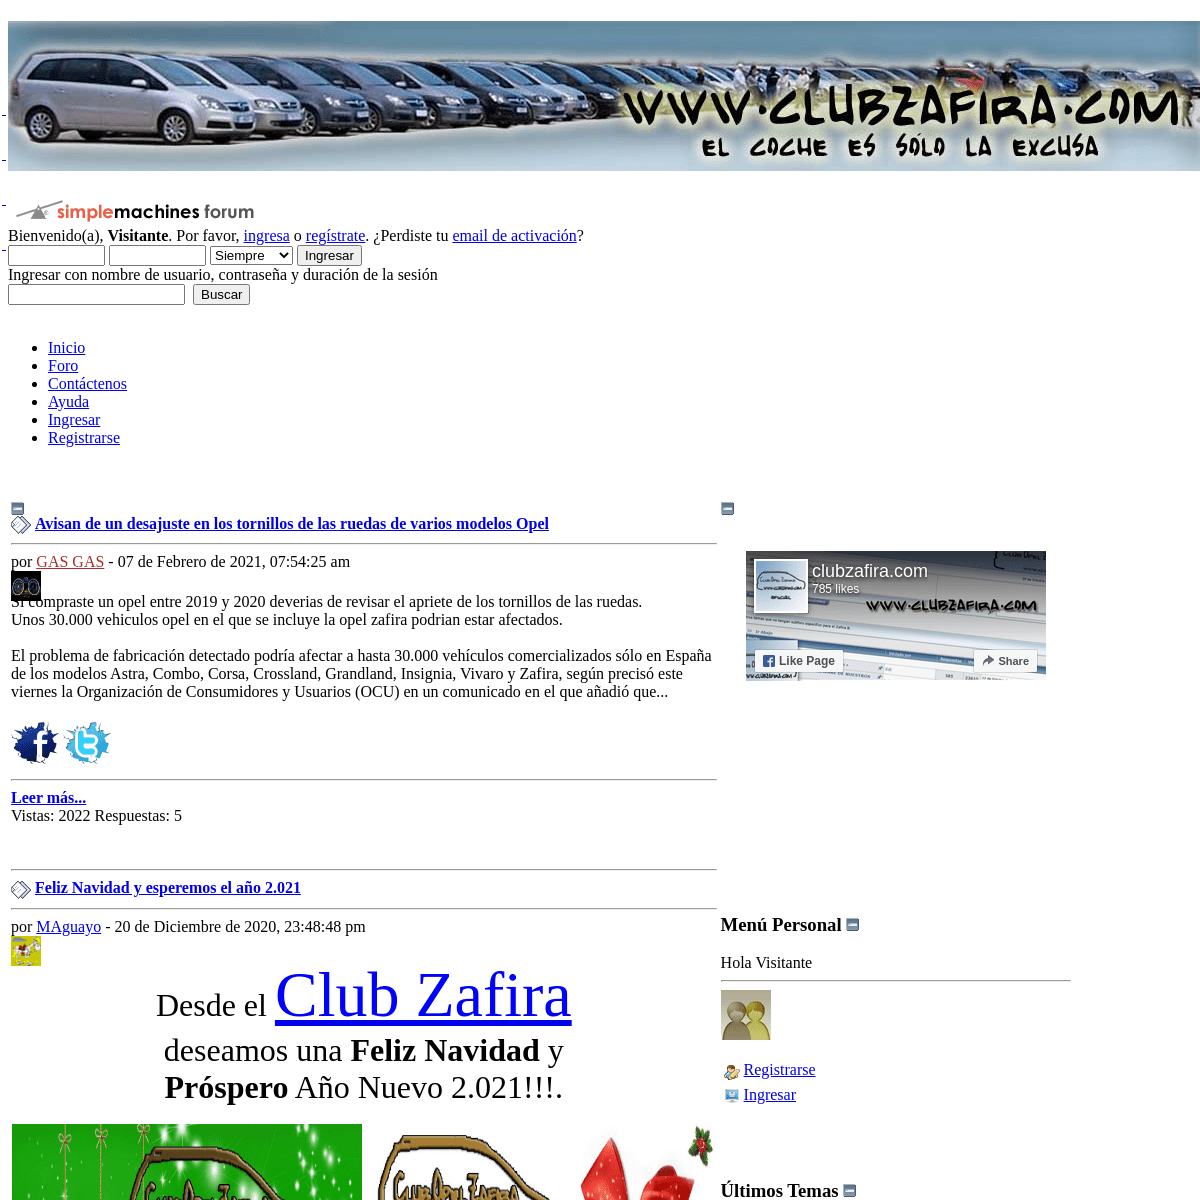 A complete backup of https://clubzafira.com